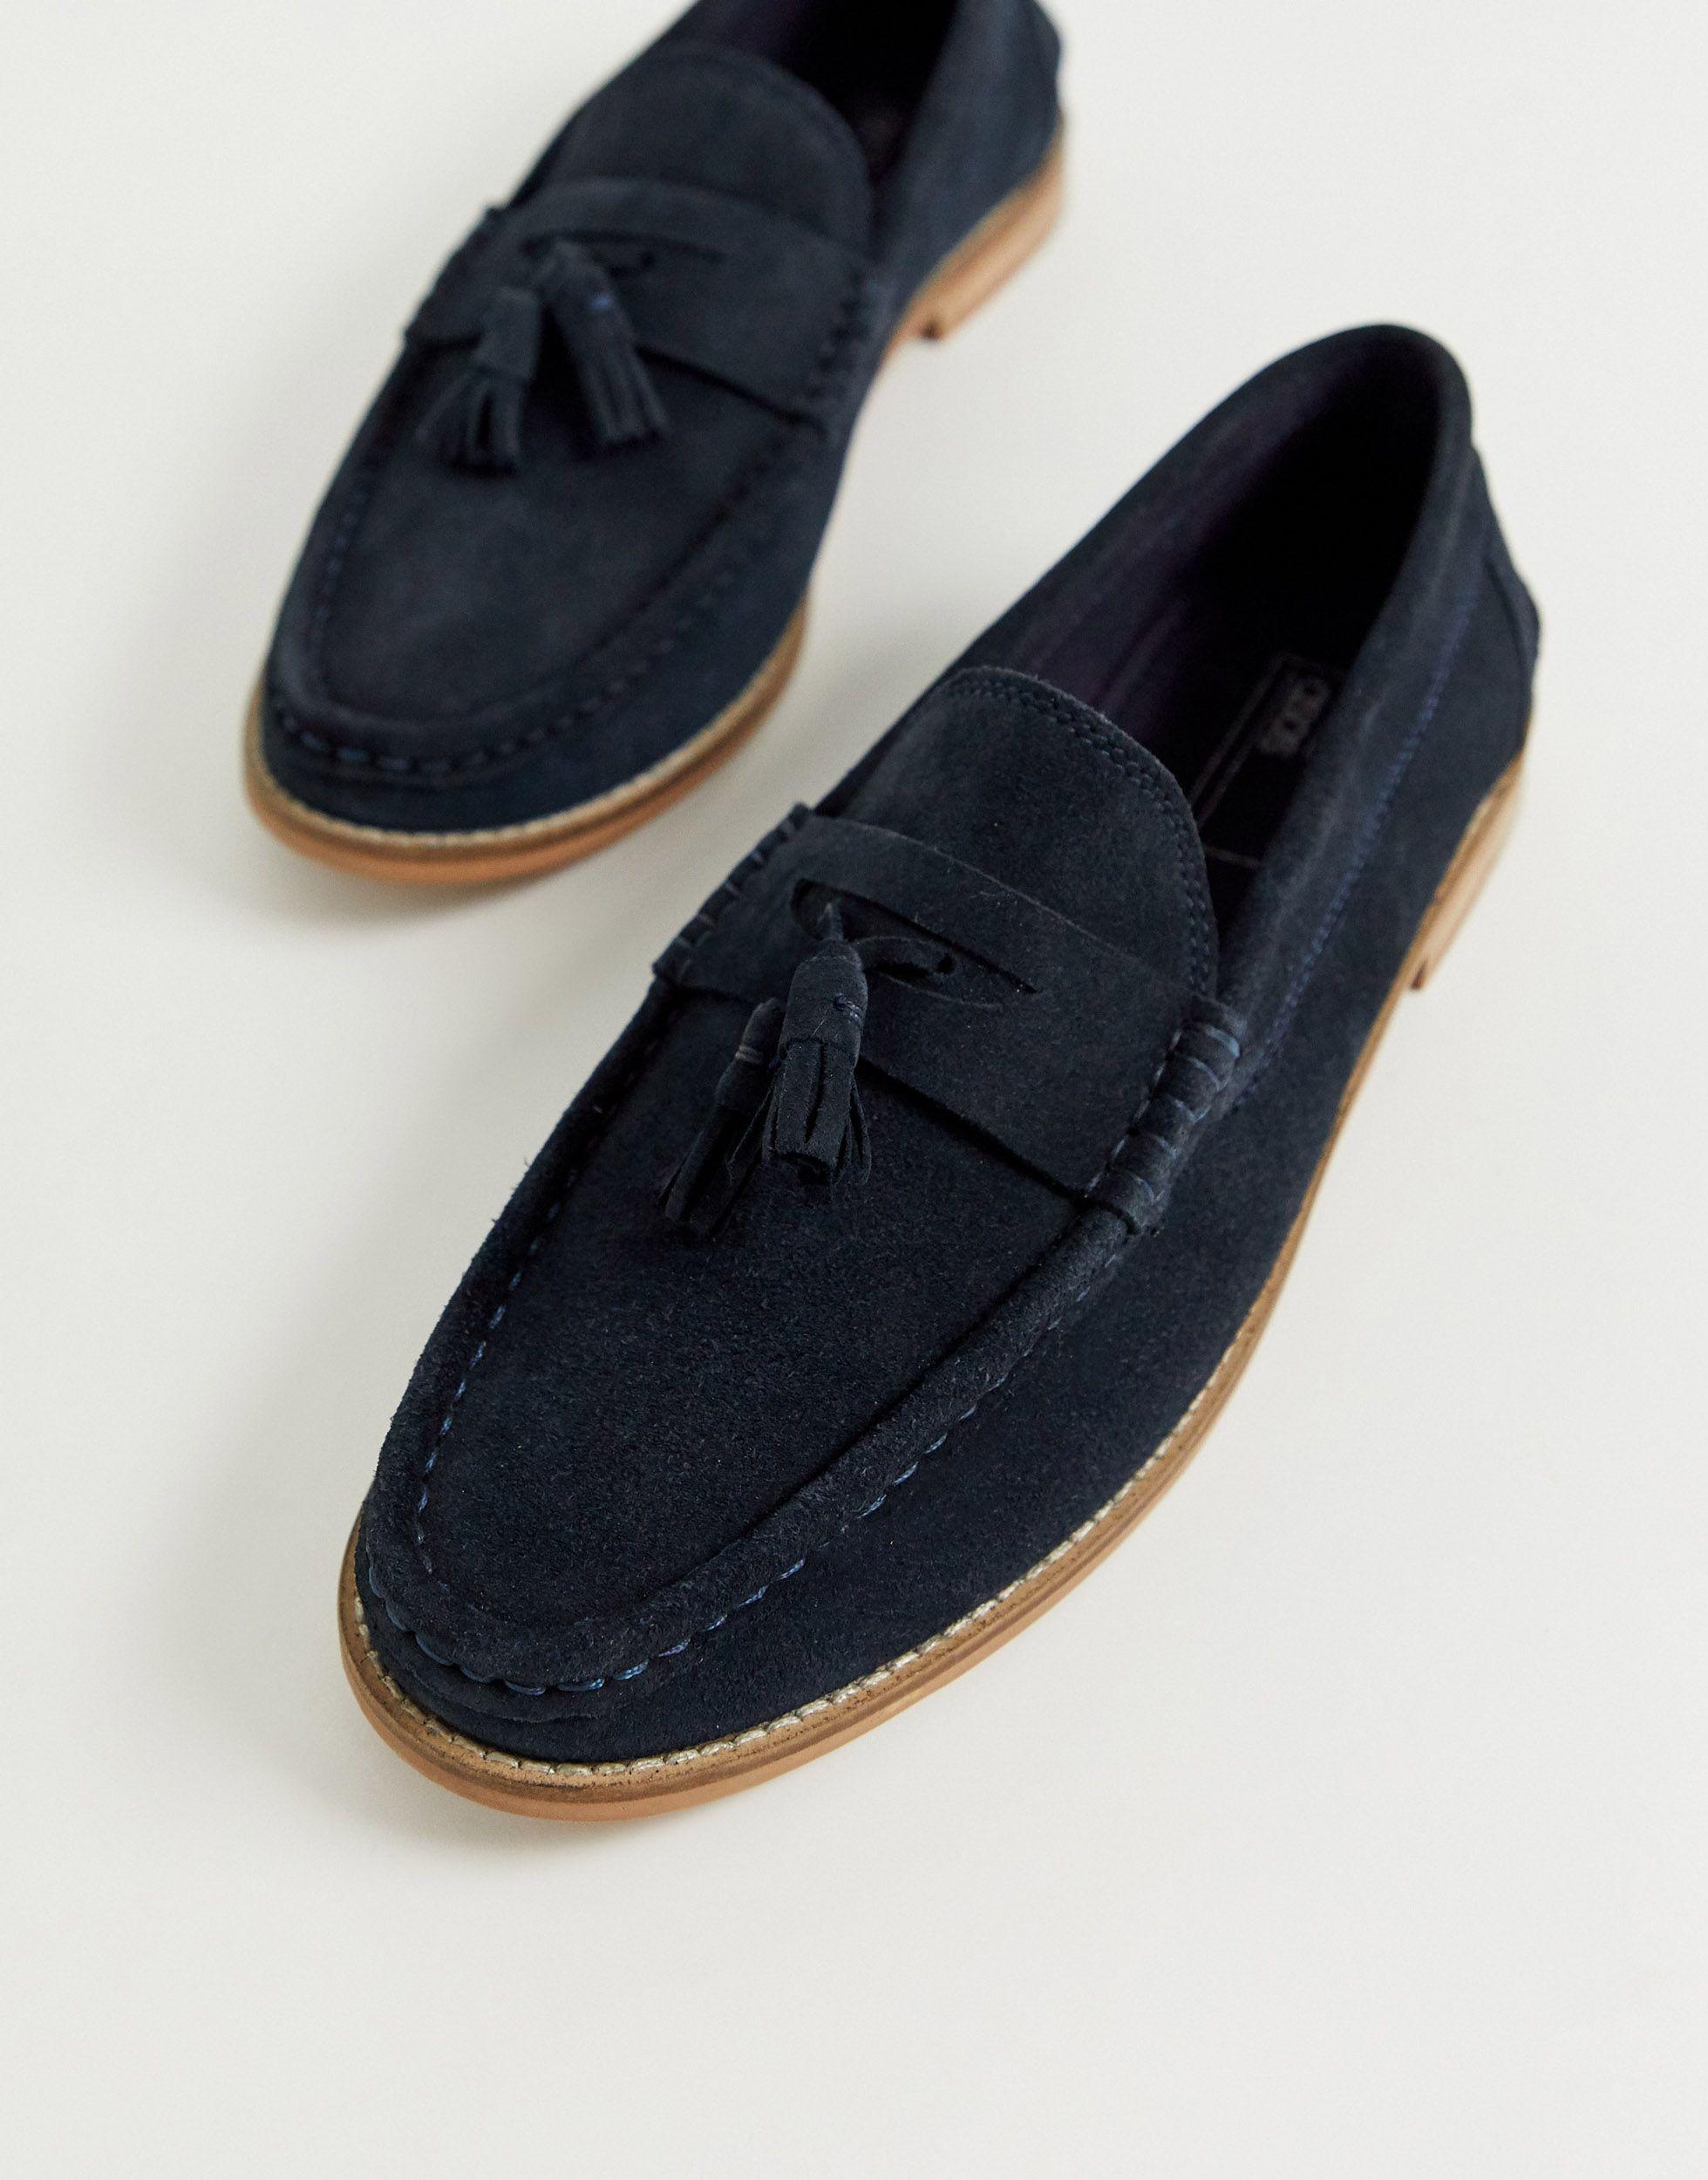 asos navy loafers